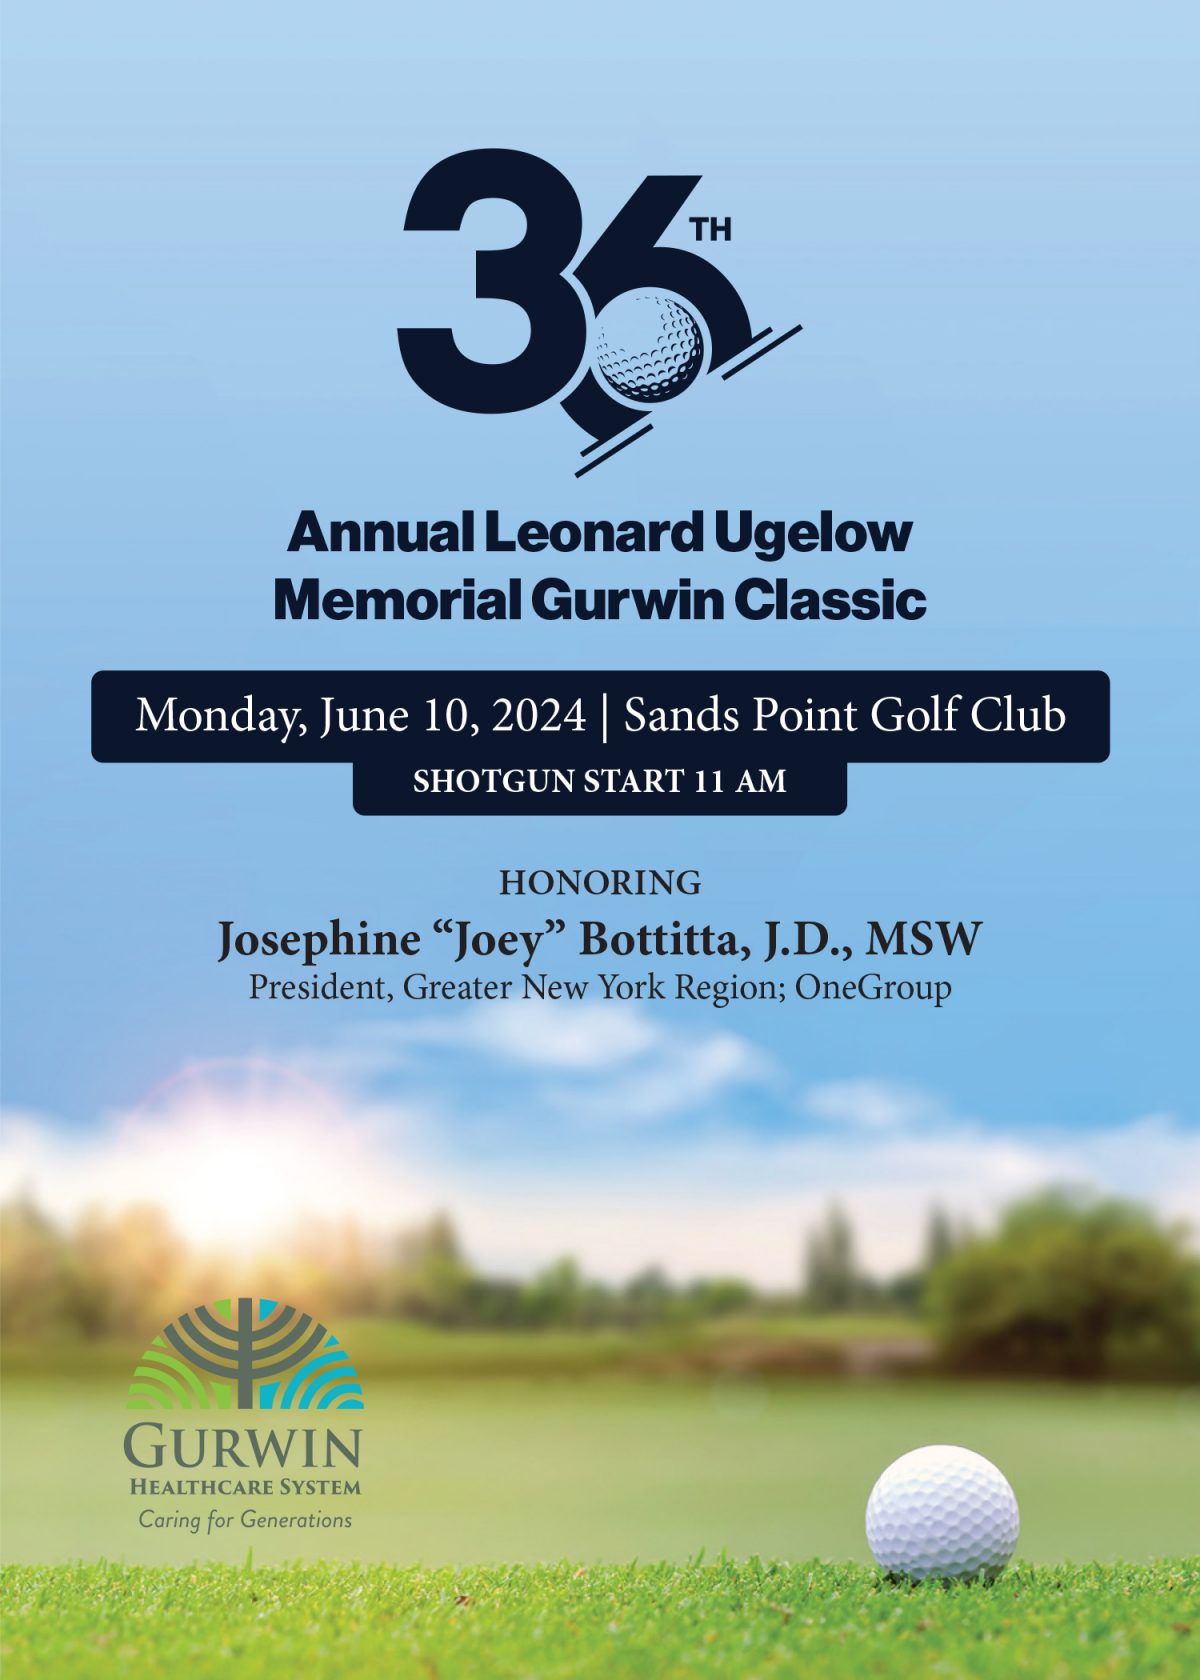 Register today for the Gurwin Golf Classic!